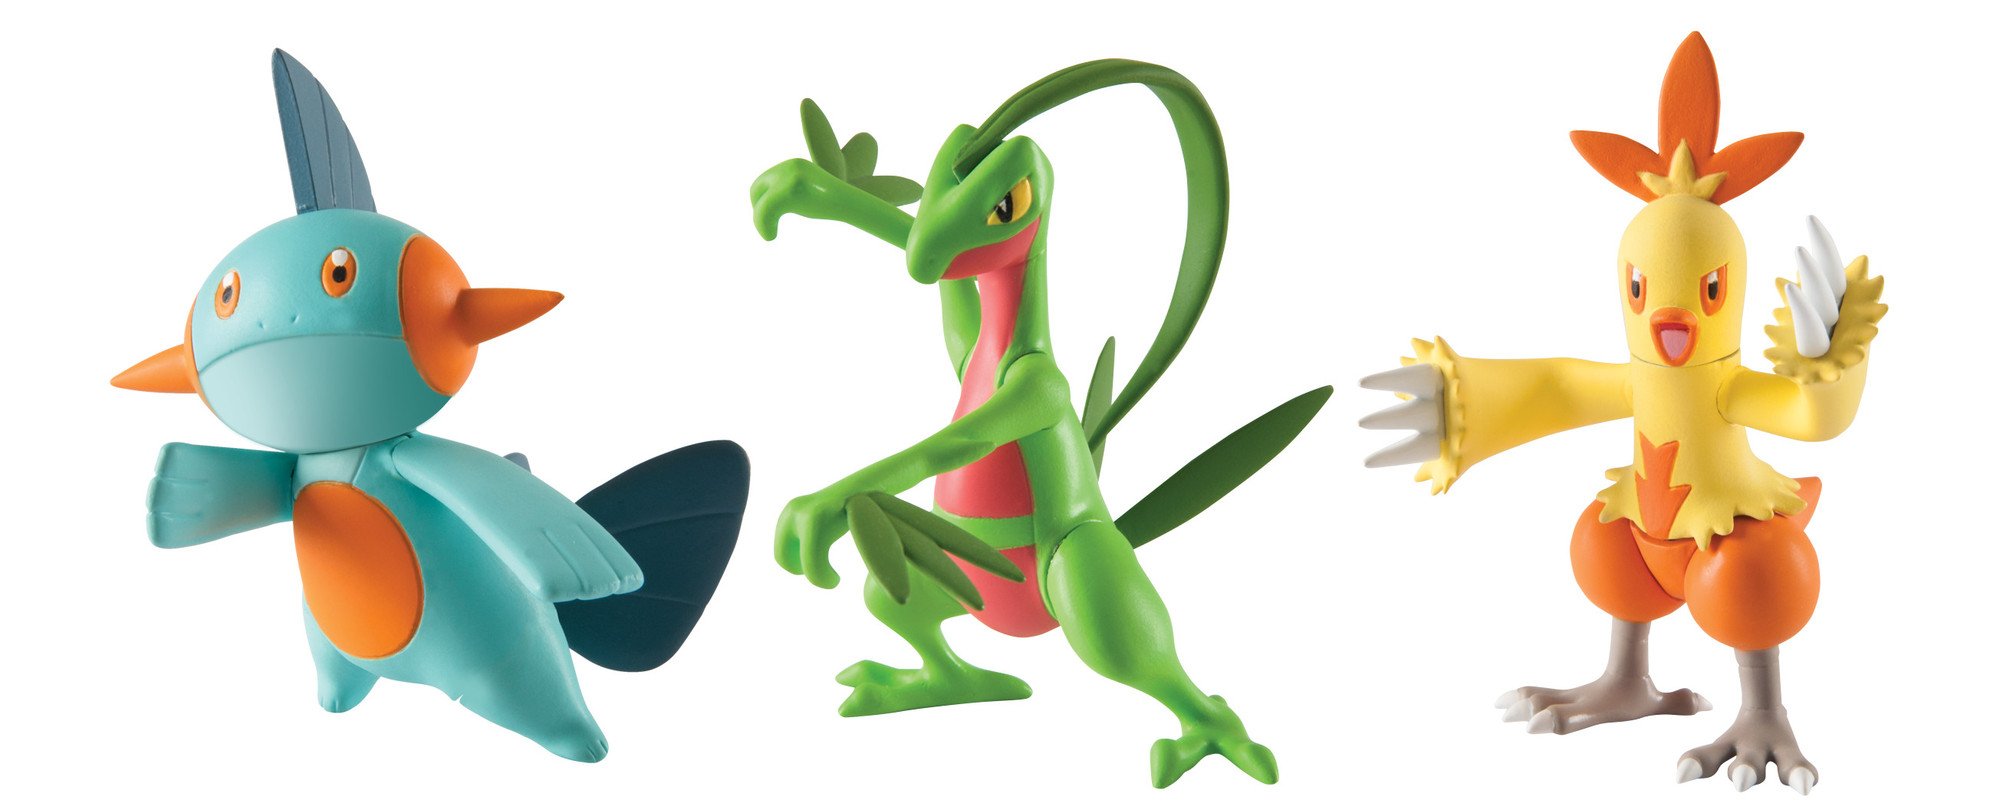 Pokmon Action Pose 3 Pack, Grovyle, Combusken and Marshtomp